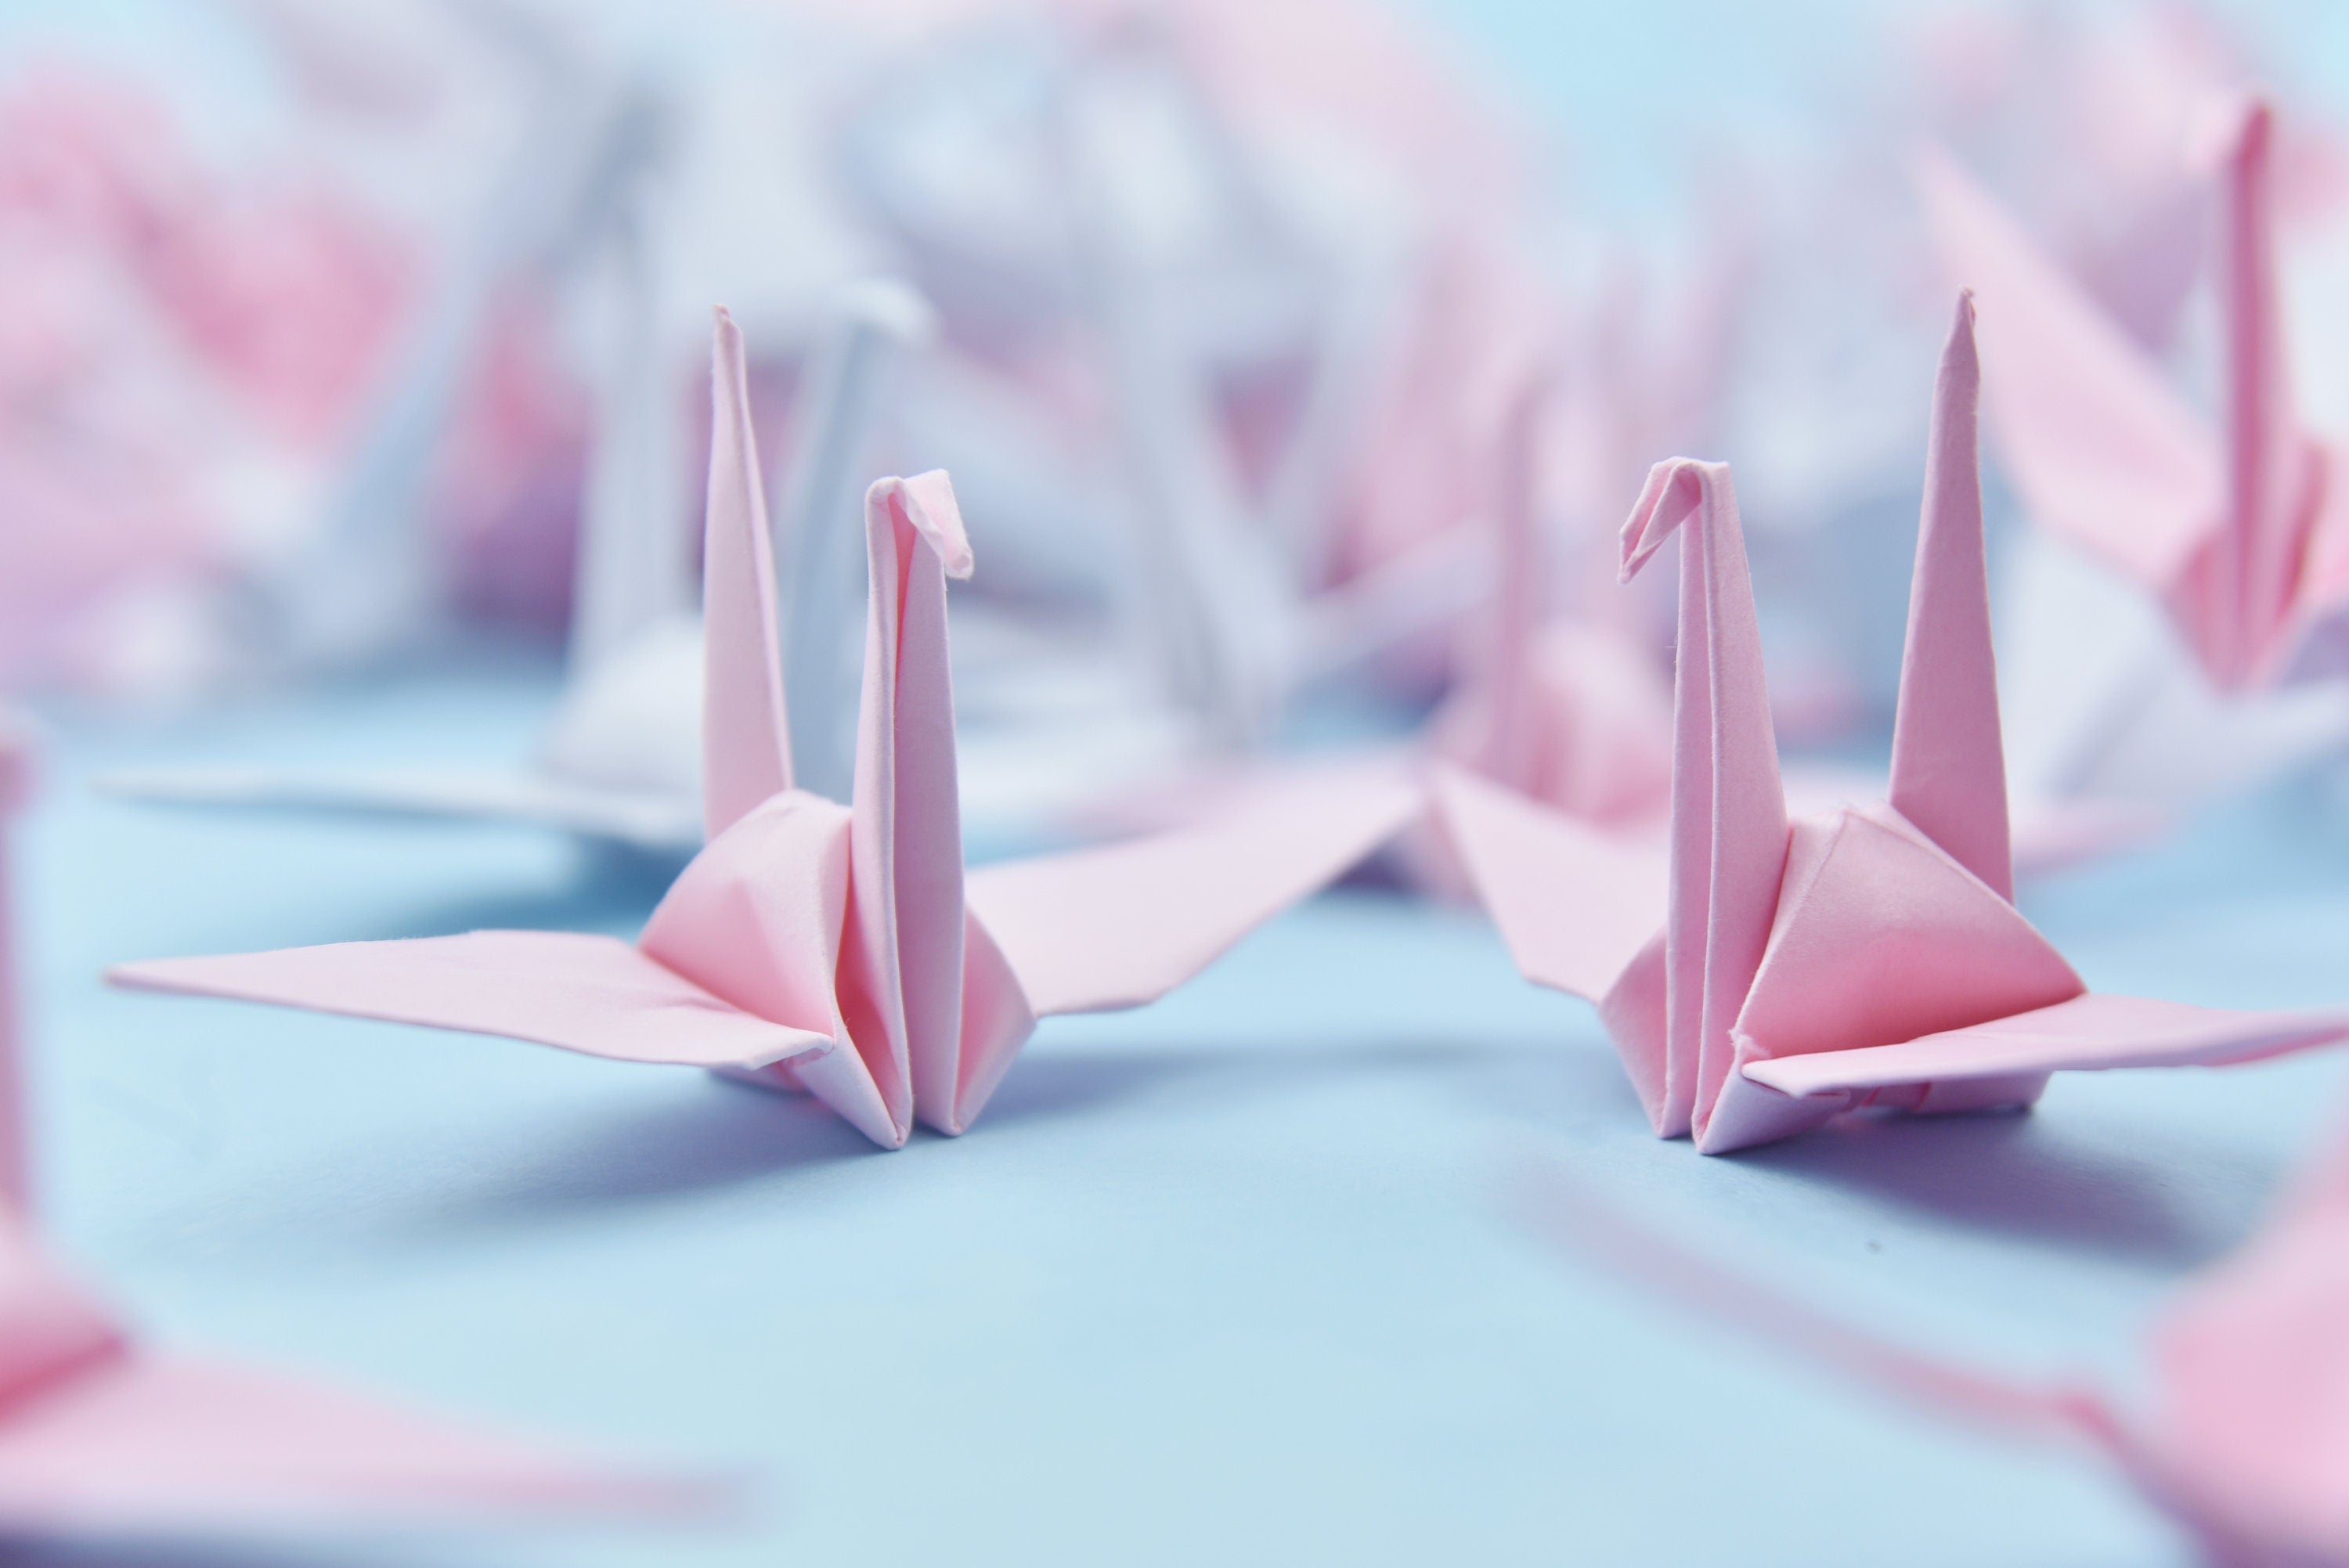 1000 Origami Paper Cranes Pink Shade Tone Made of 7.5cm (3x3 inches) for Wedding Decor, Anniversary Gift, Origami Cranes